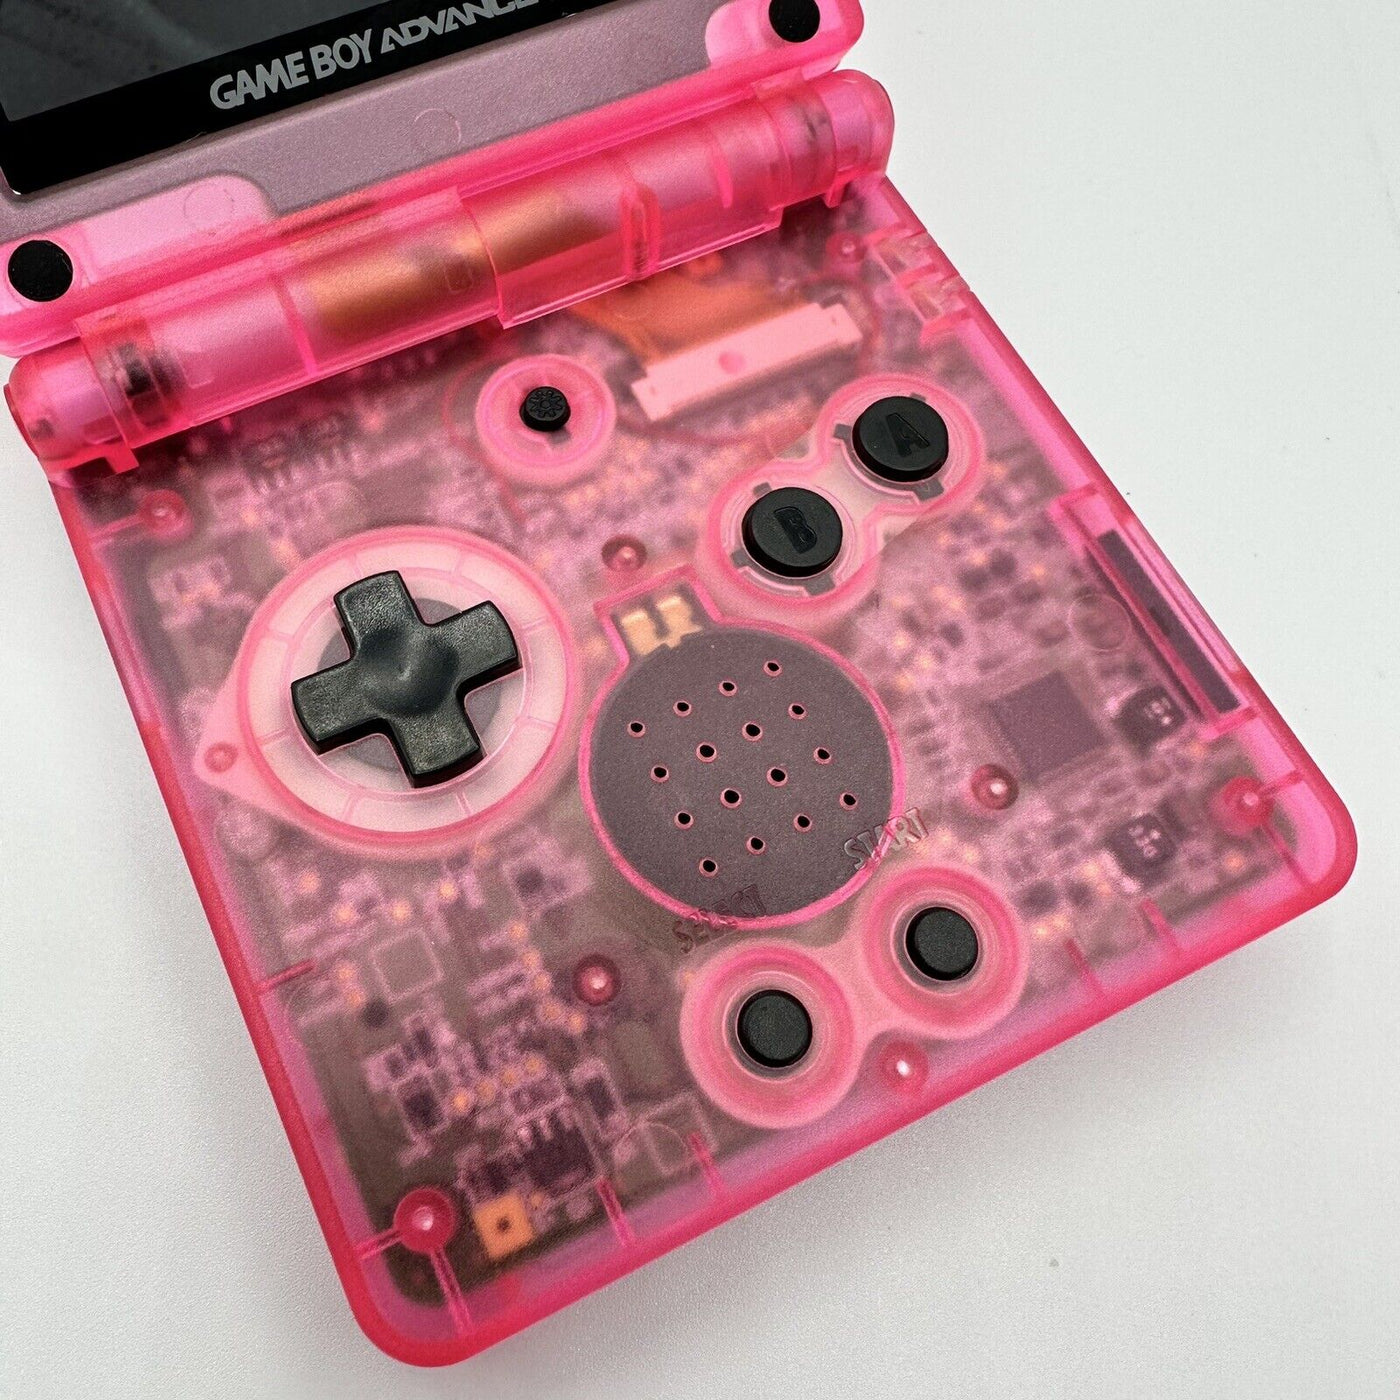 Game Boy Advance SP Console - Pink